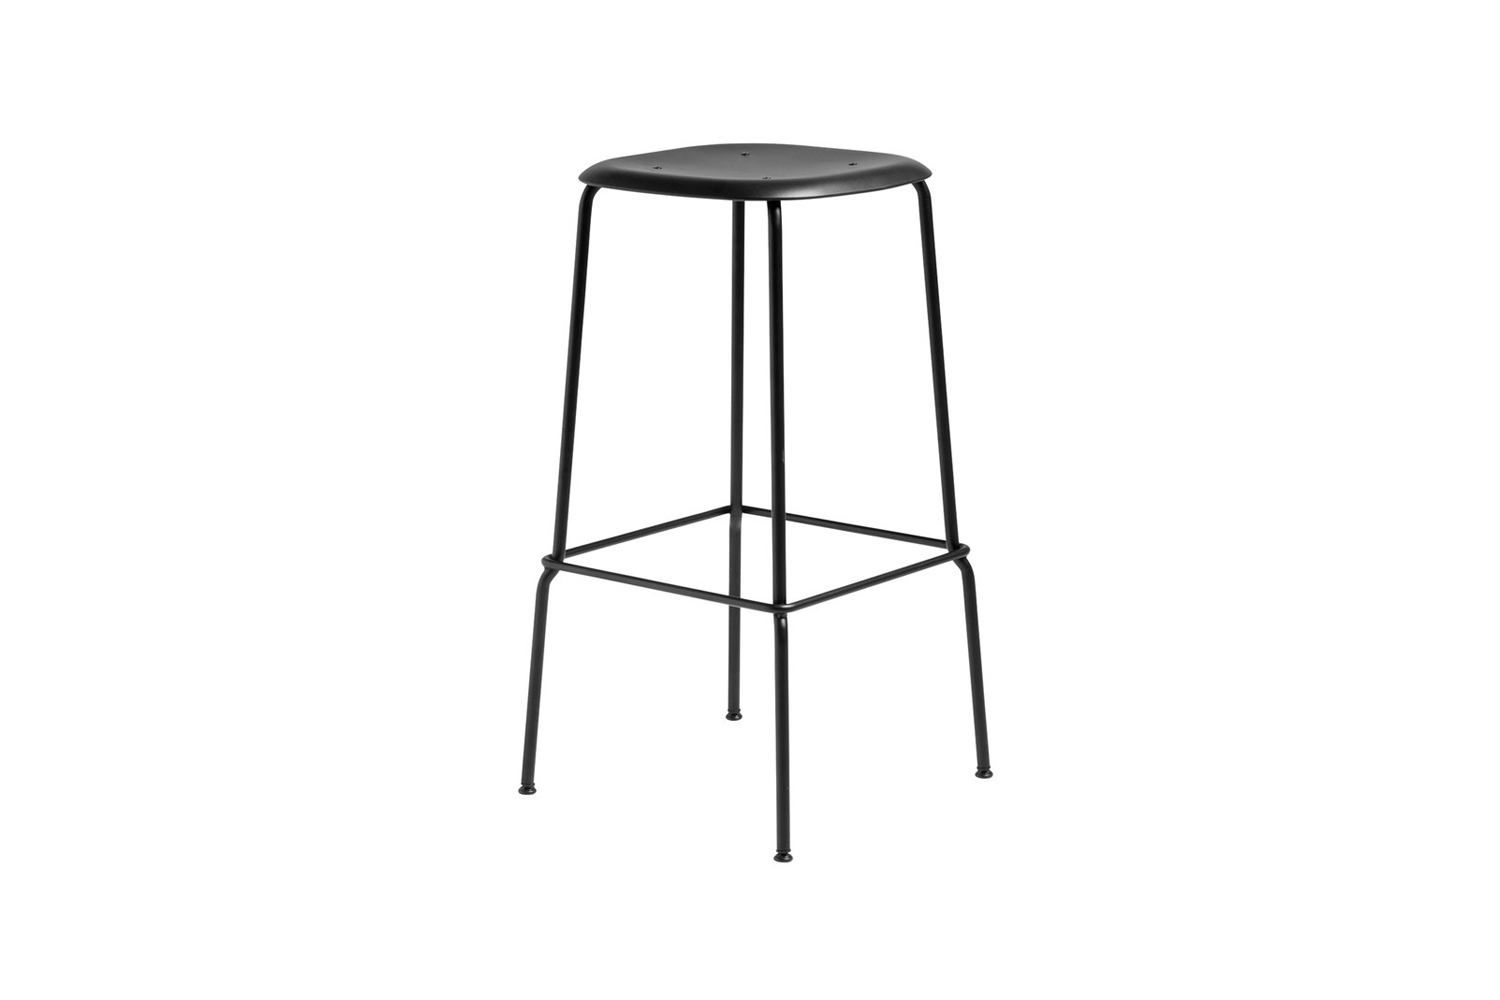 the hay soft edge p30 bar stool in black is \$\178 for the 65cm high size at fi 10